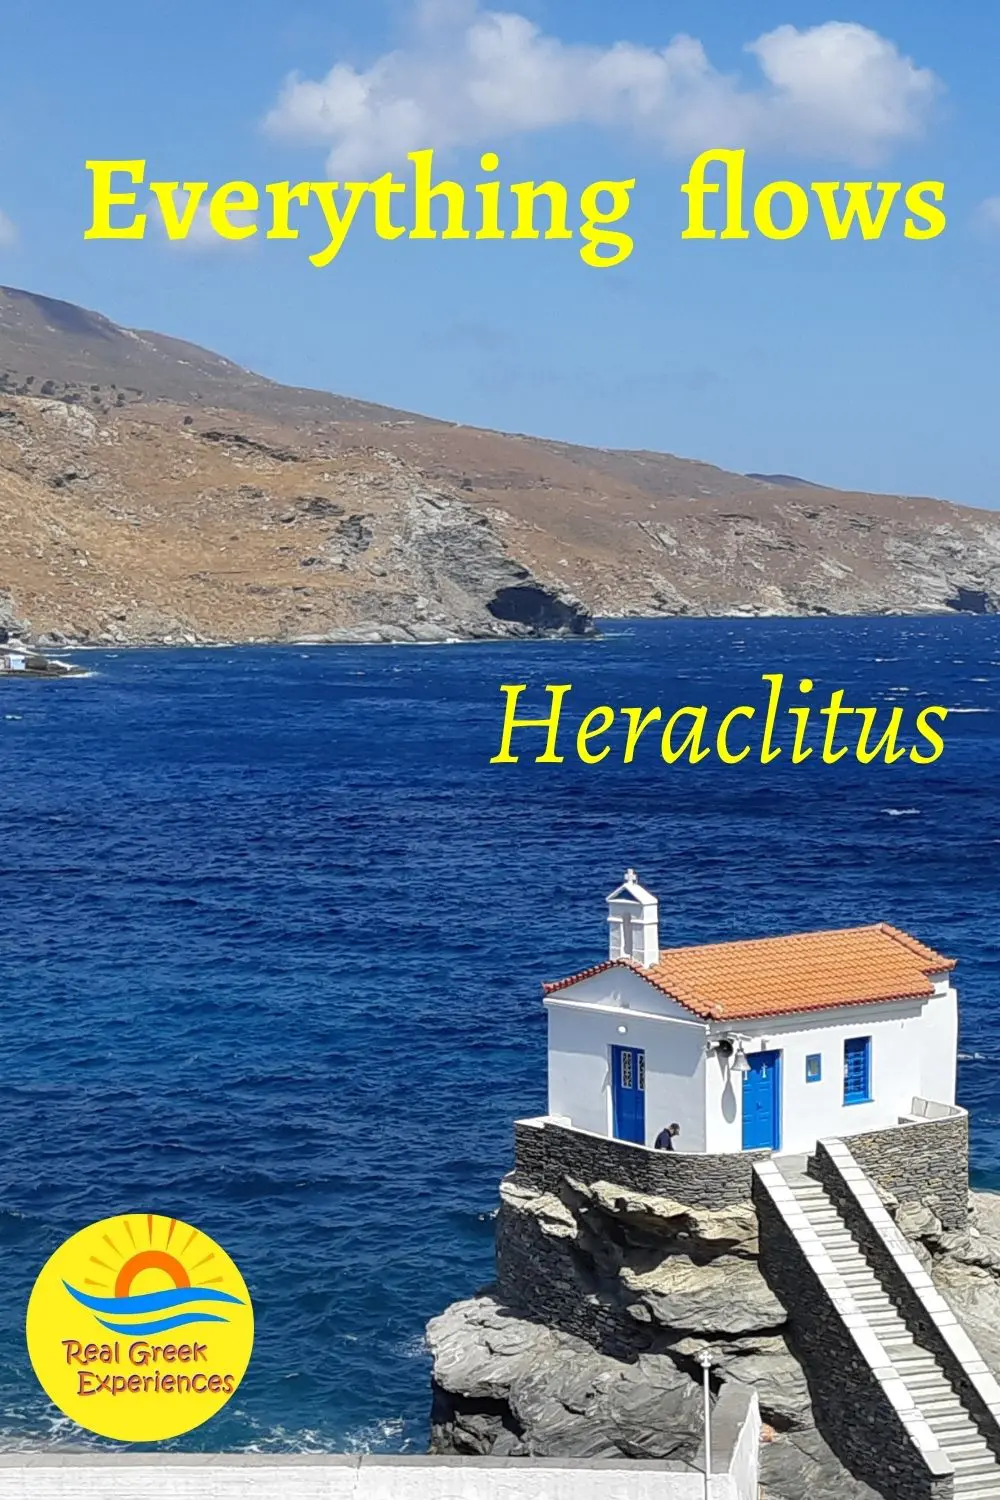 Quotes by Greek philosophers - Everything flows - Heraclitus